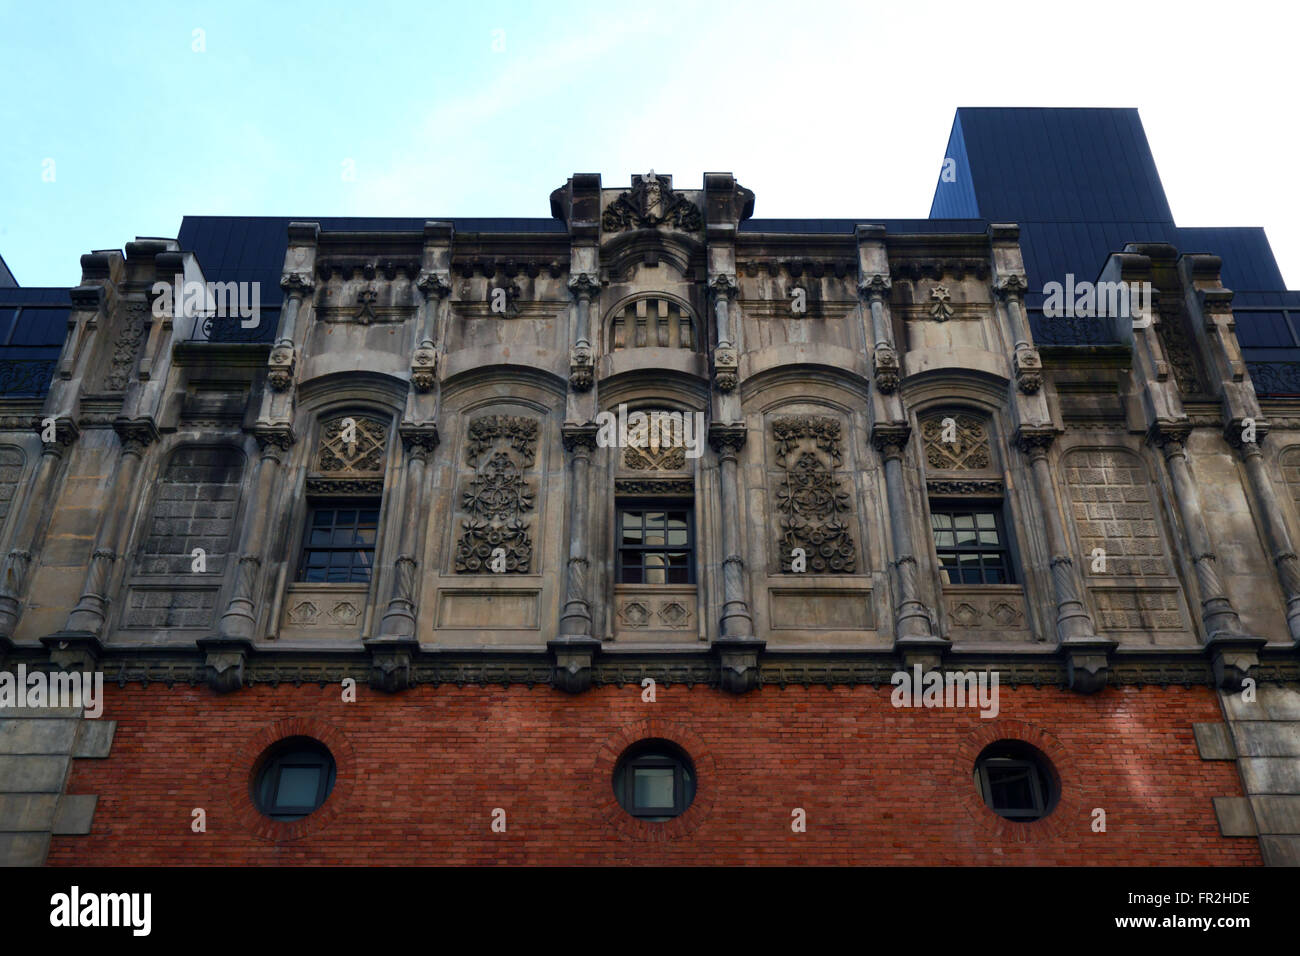 Side wall of the Alhondiga building, now the Azkuna Zentroa cultural centre, Bilbao, Basque Country, Spain Stock Photo